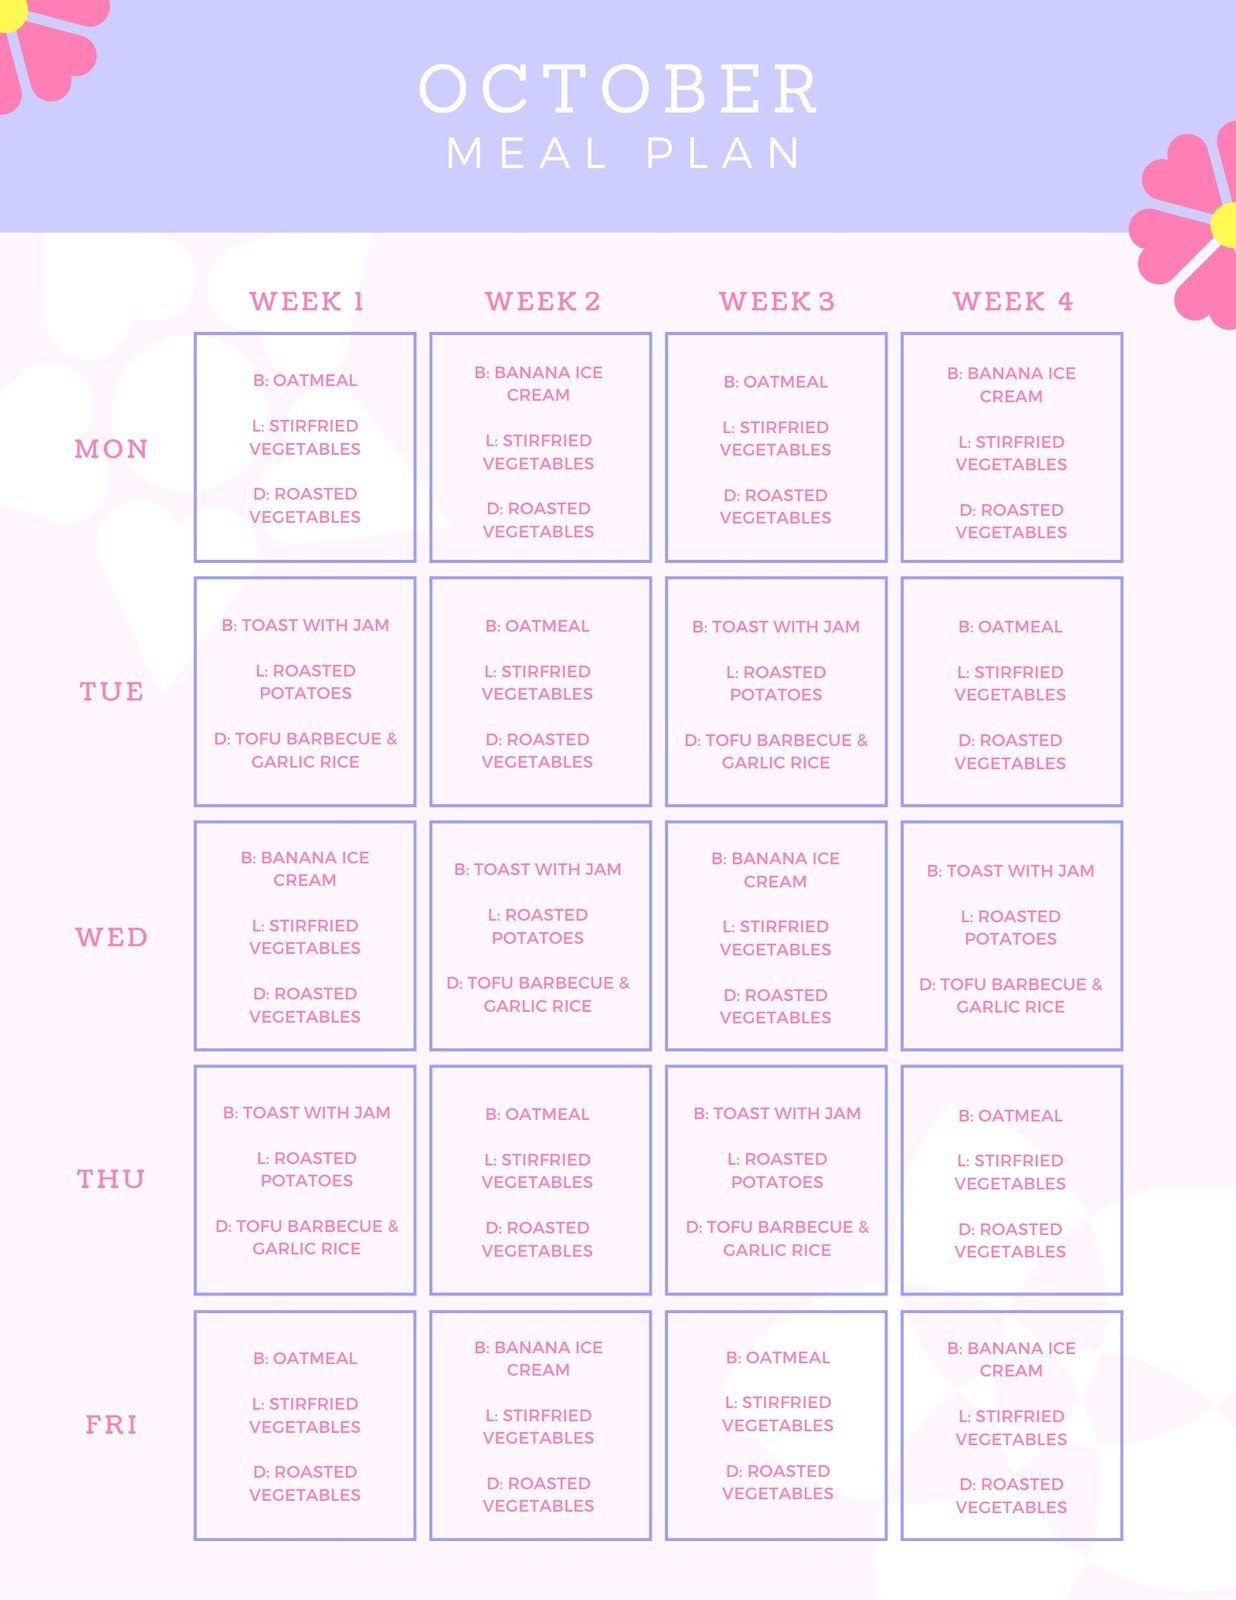 https://marketplace.canva.com/EADaoZmAbaM/1/0/1236w/canva-lilac-and-pink-girly-monthly-meal-plan-menu-RVTEg4xoOQw.jpg